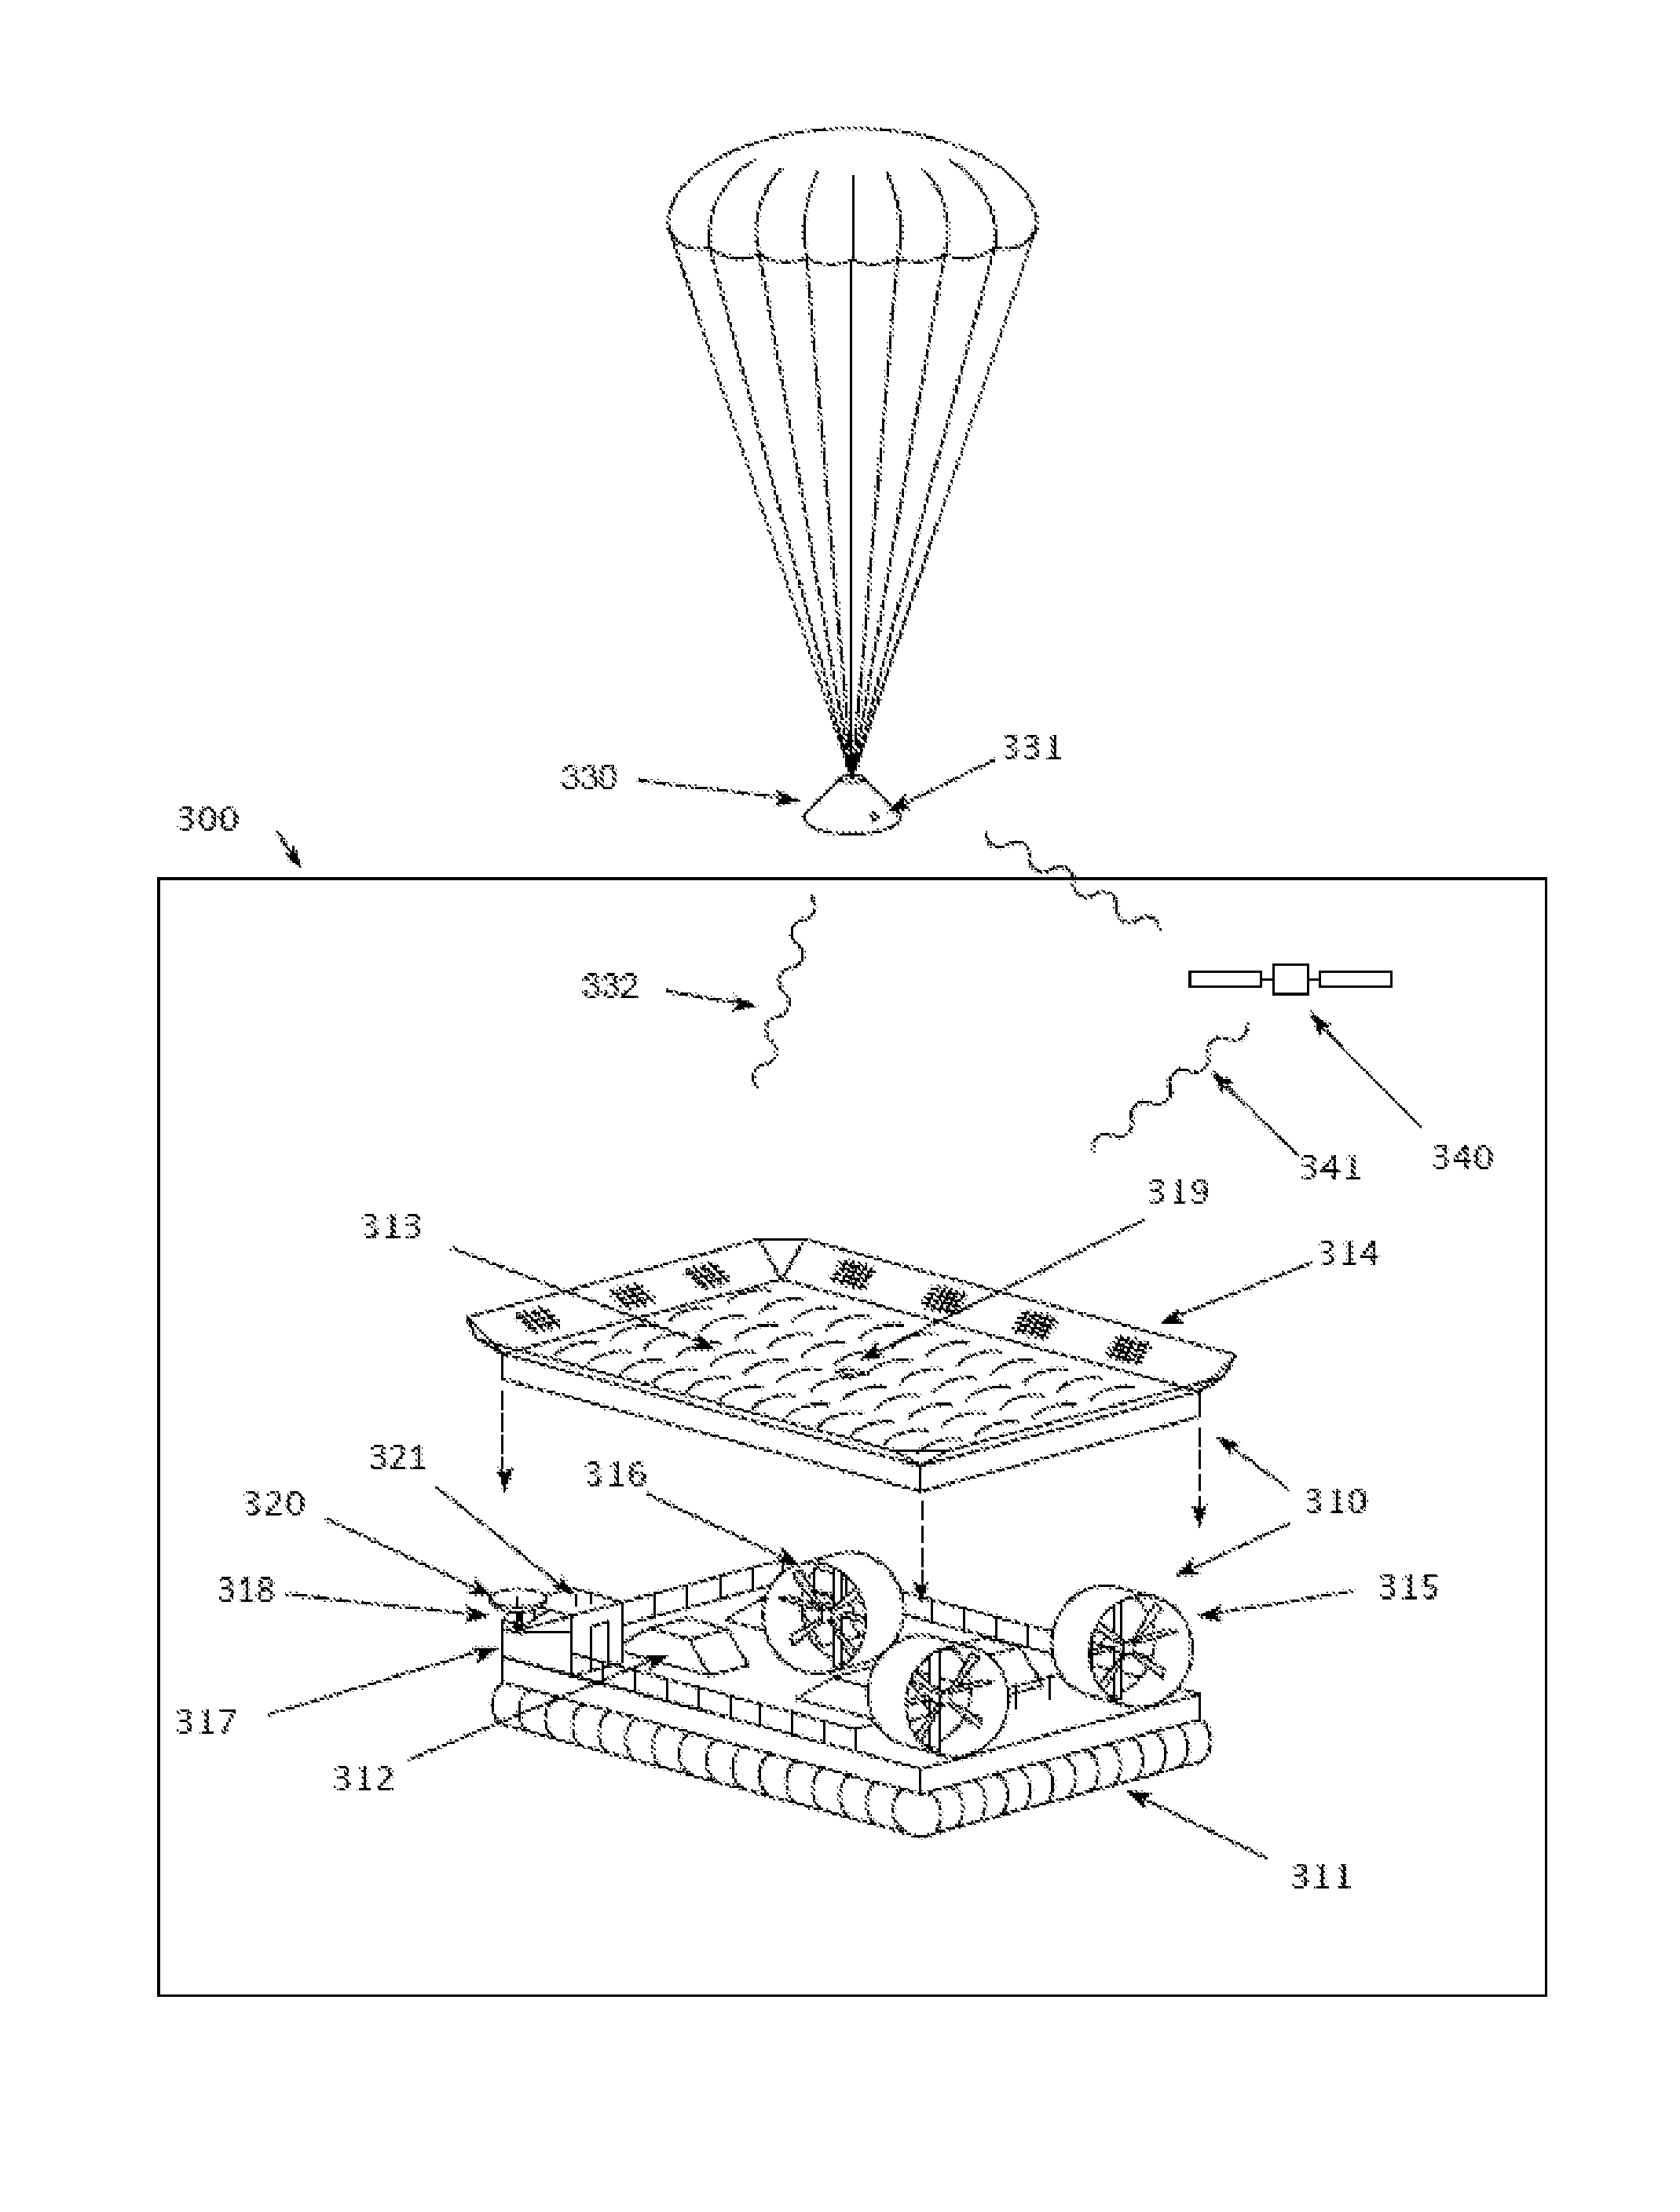 Movable ground based recovery system for reuseable space flight hardware